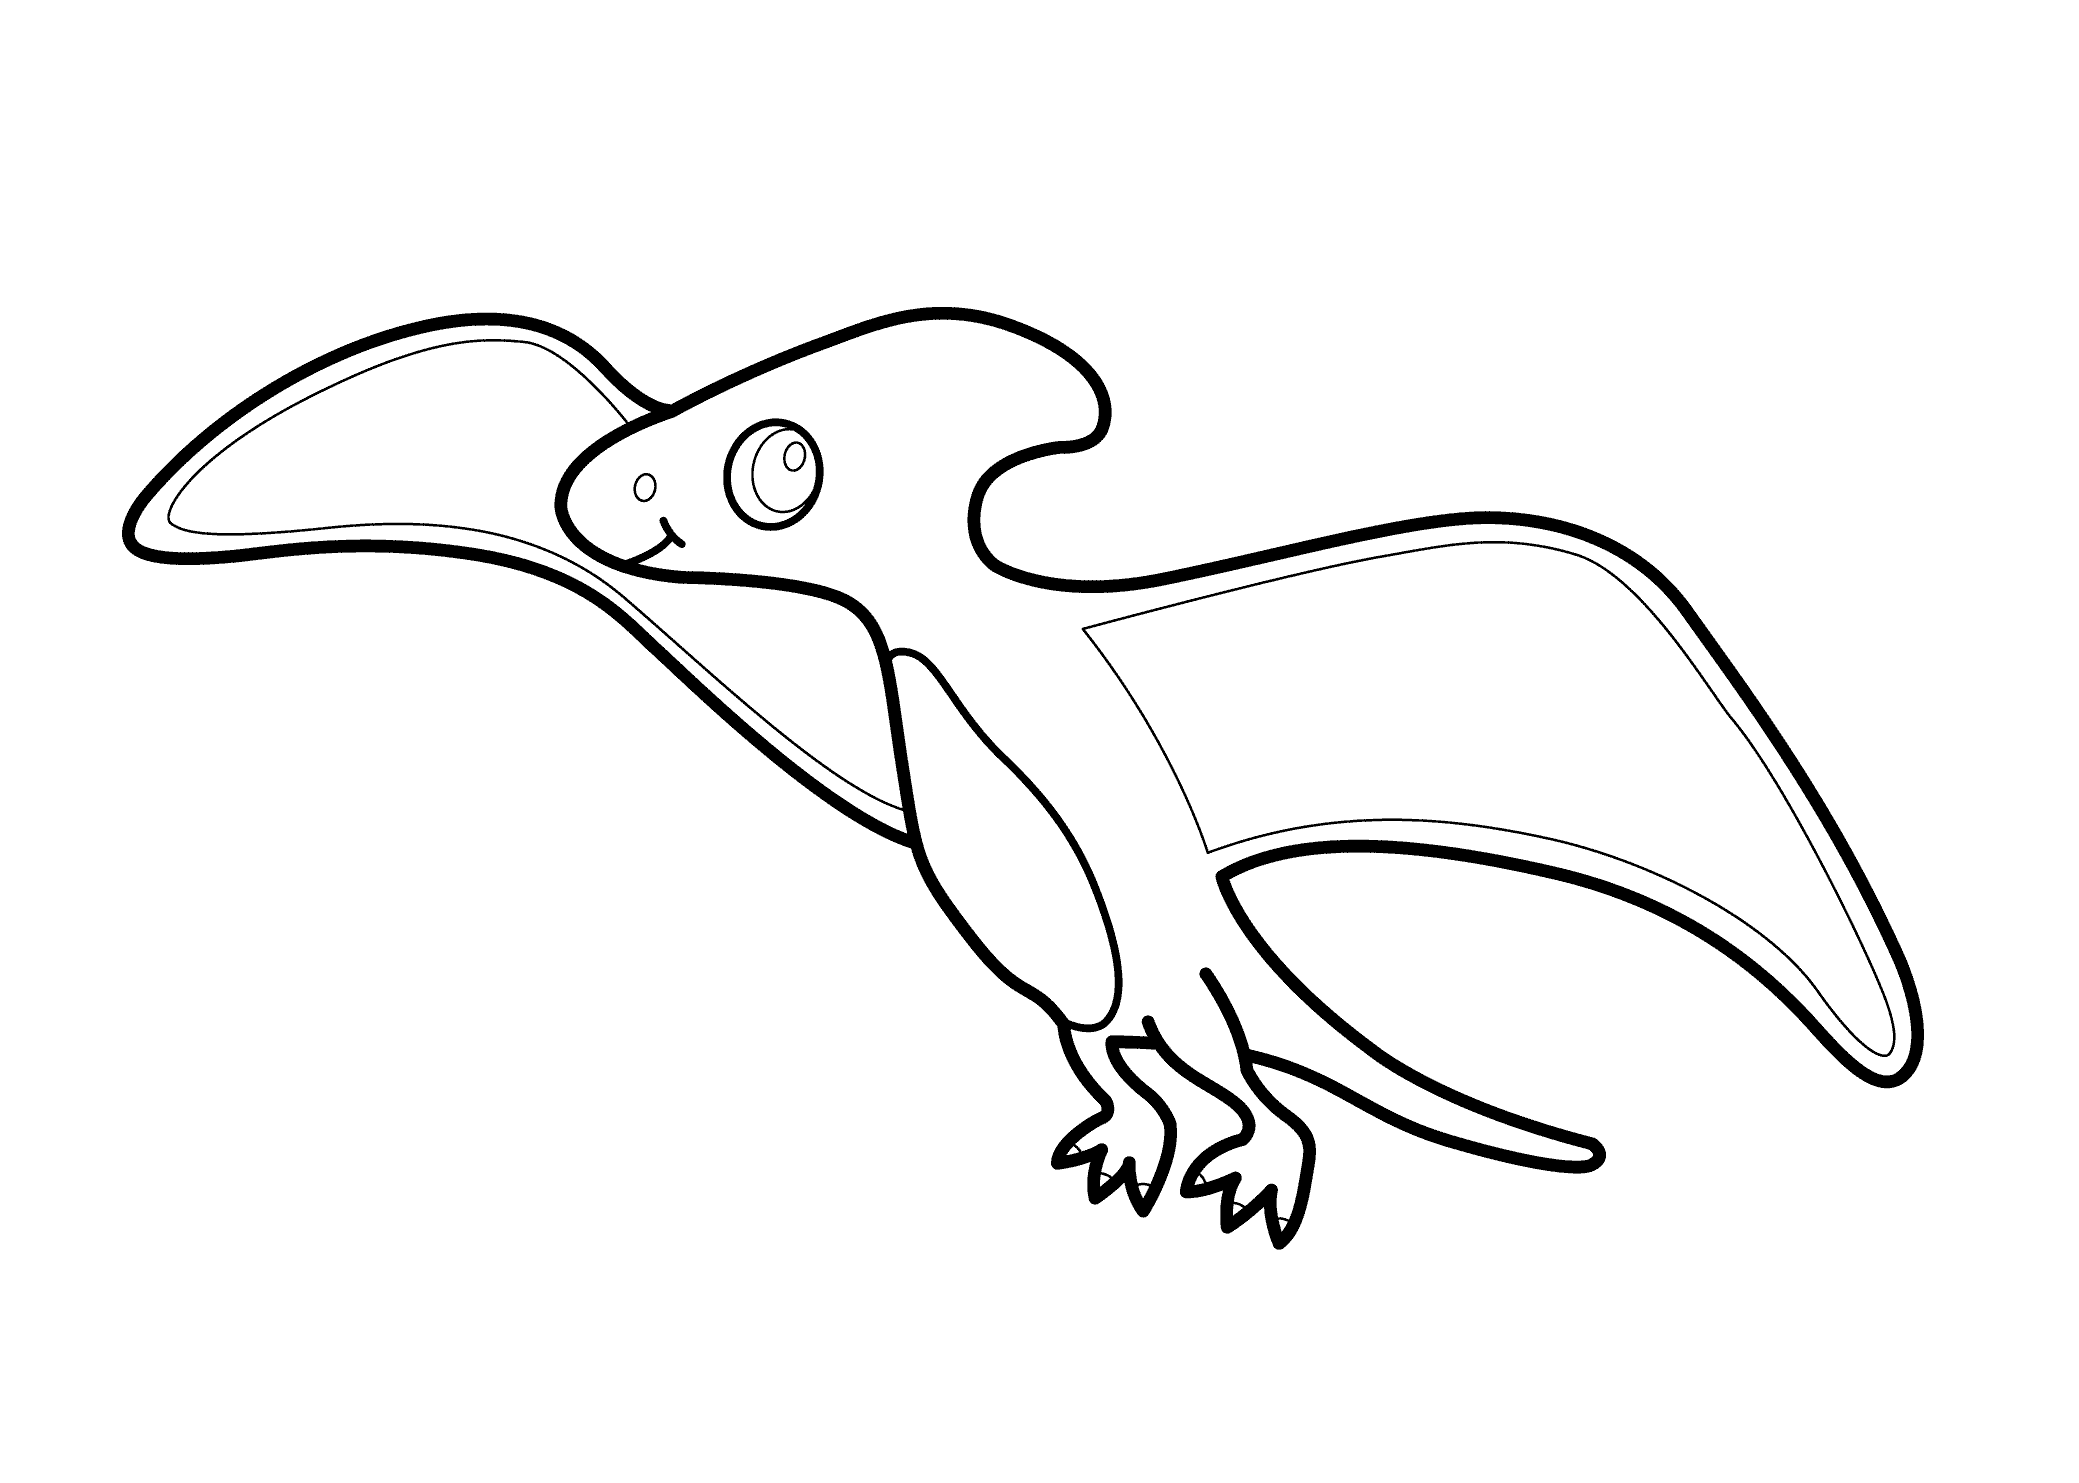 Little dinosaur pteranodon cartoon coloring pages for kids printable free cartoon coloring pages coloring pages for kids coloring pages